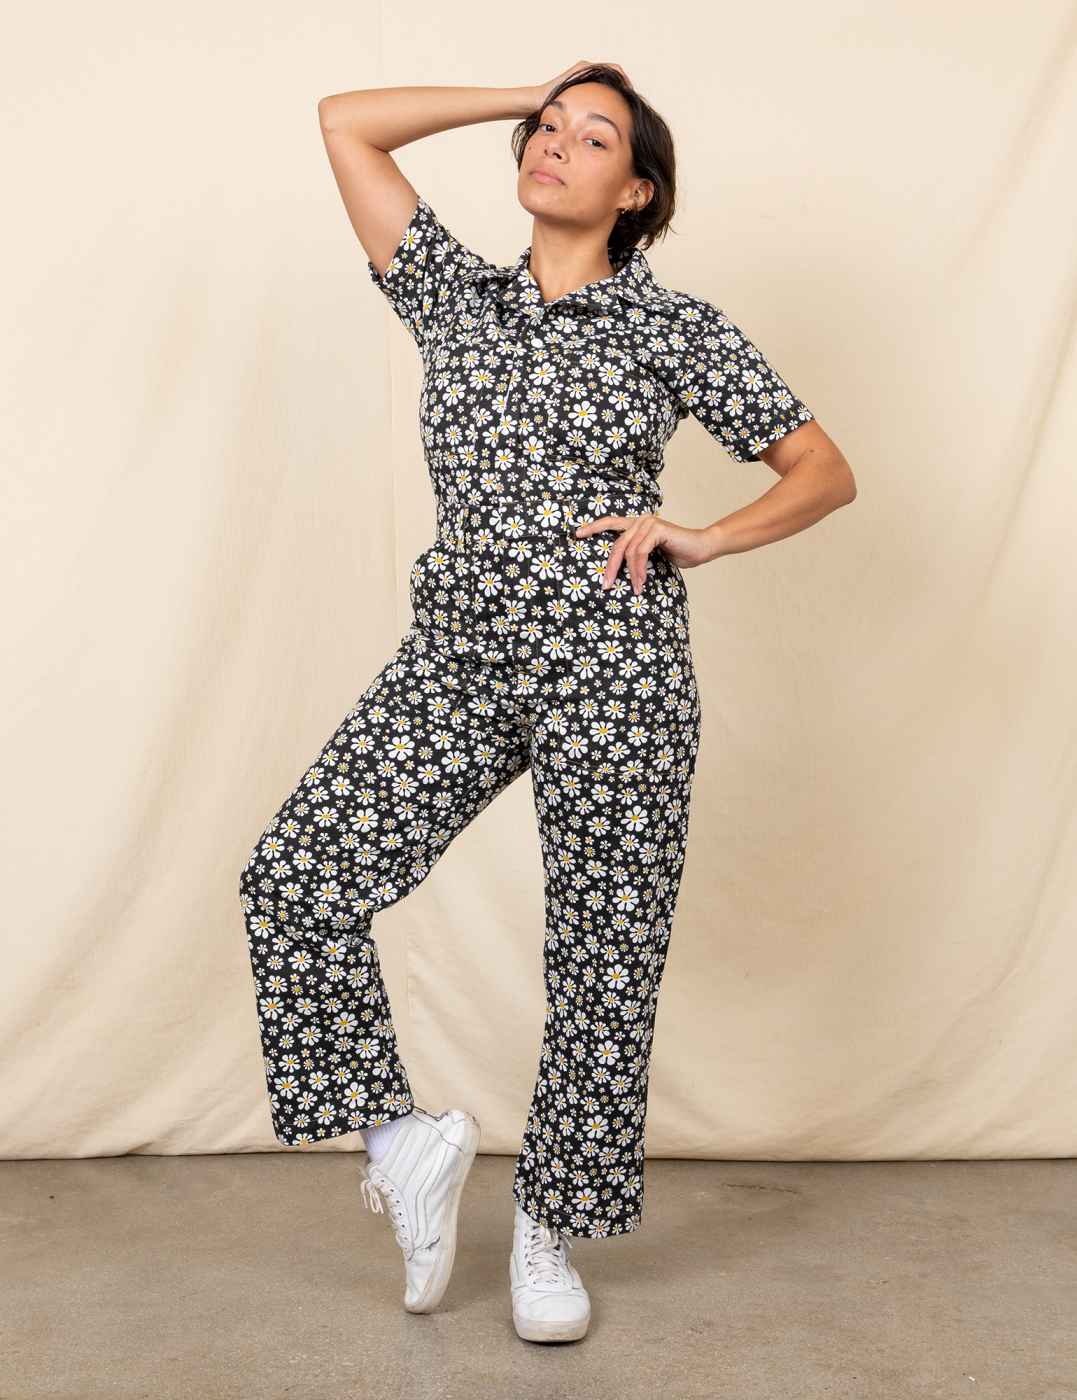 Best and Worst of the Gender Neutral Loungewear: Comparing Outfits